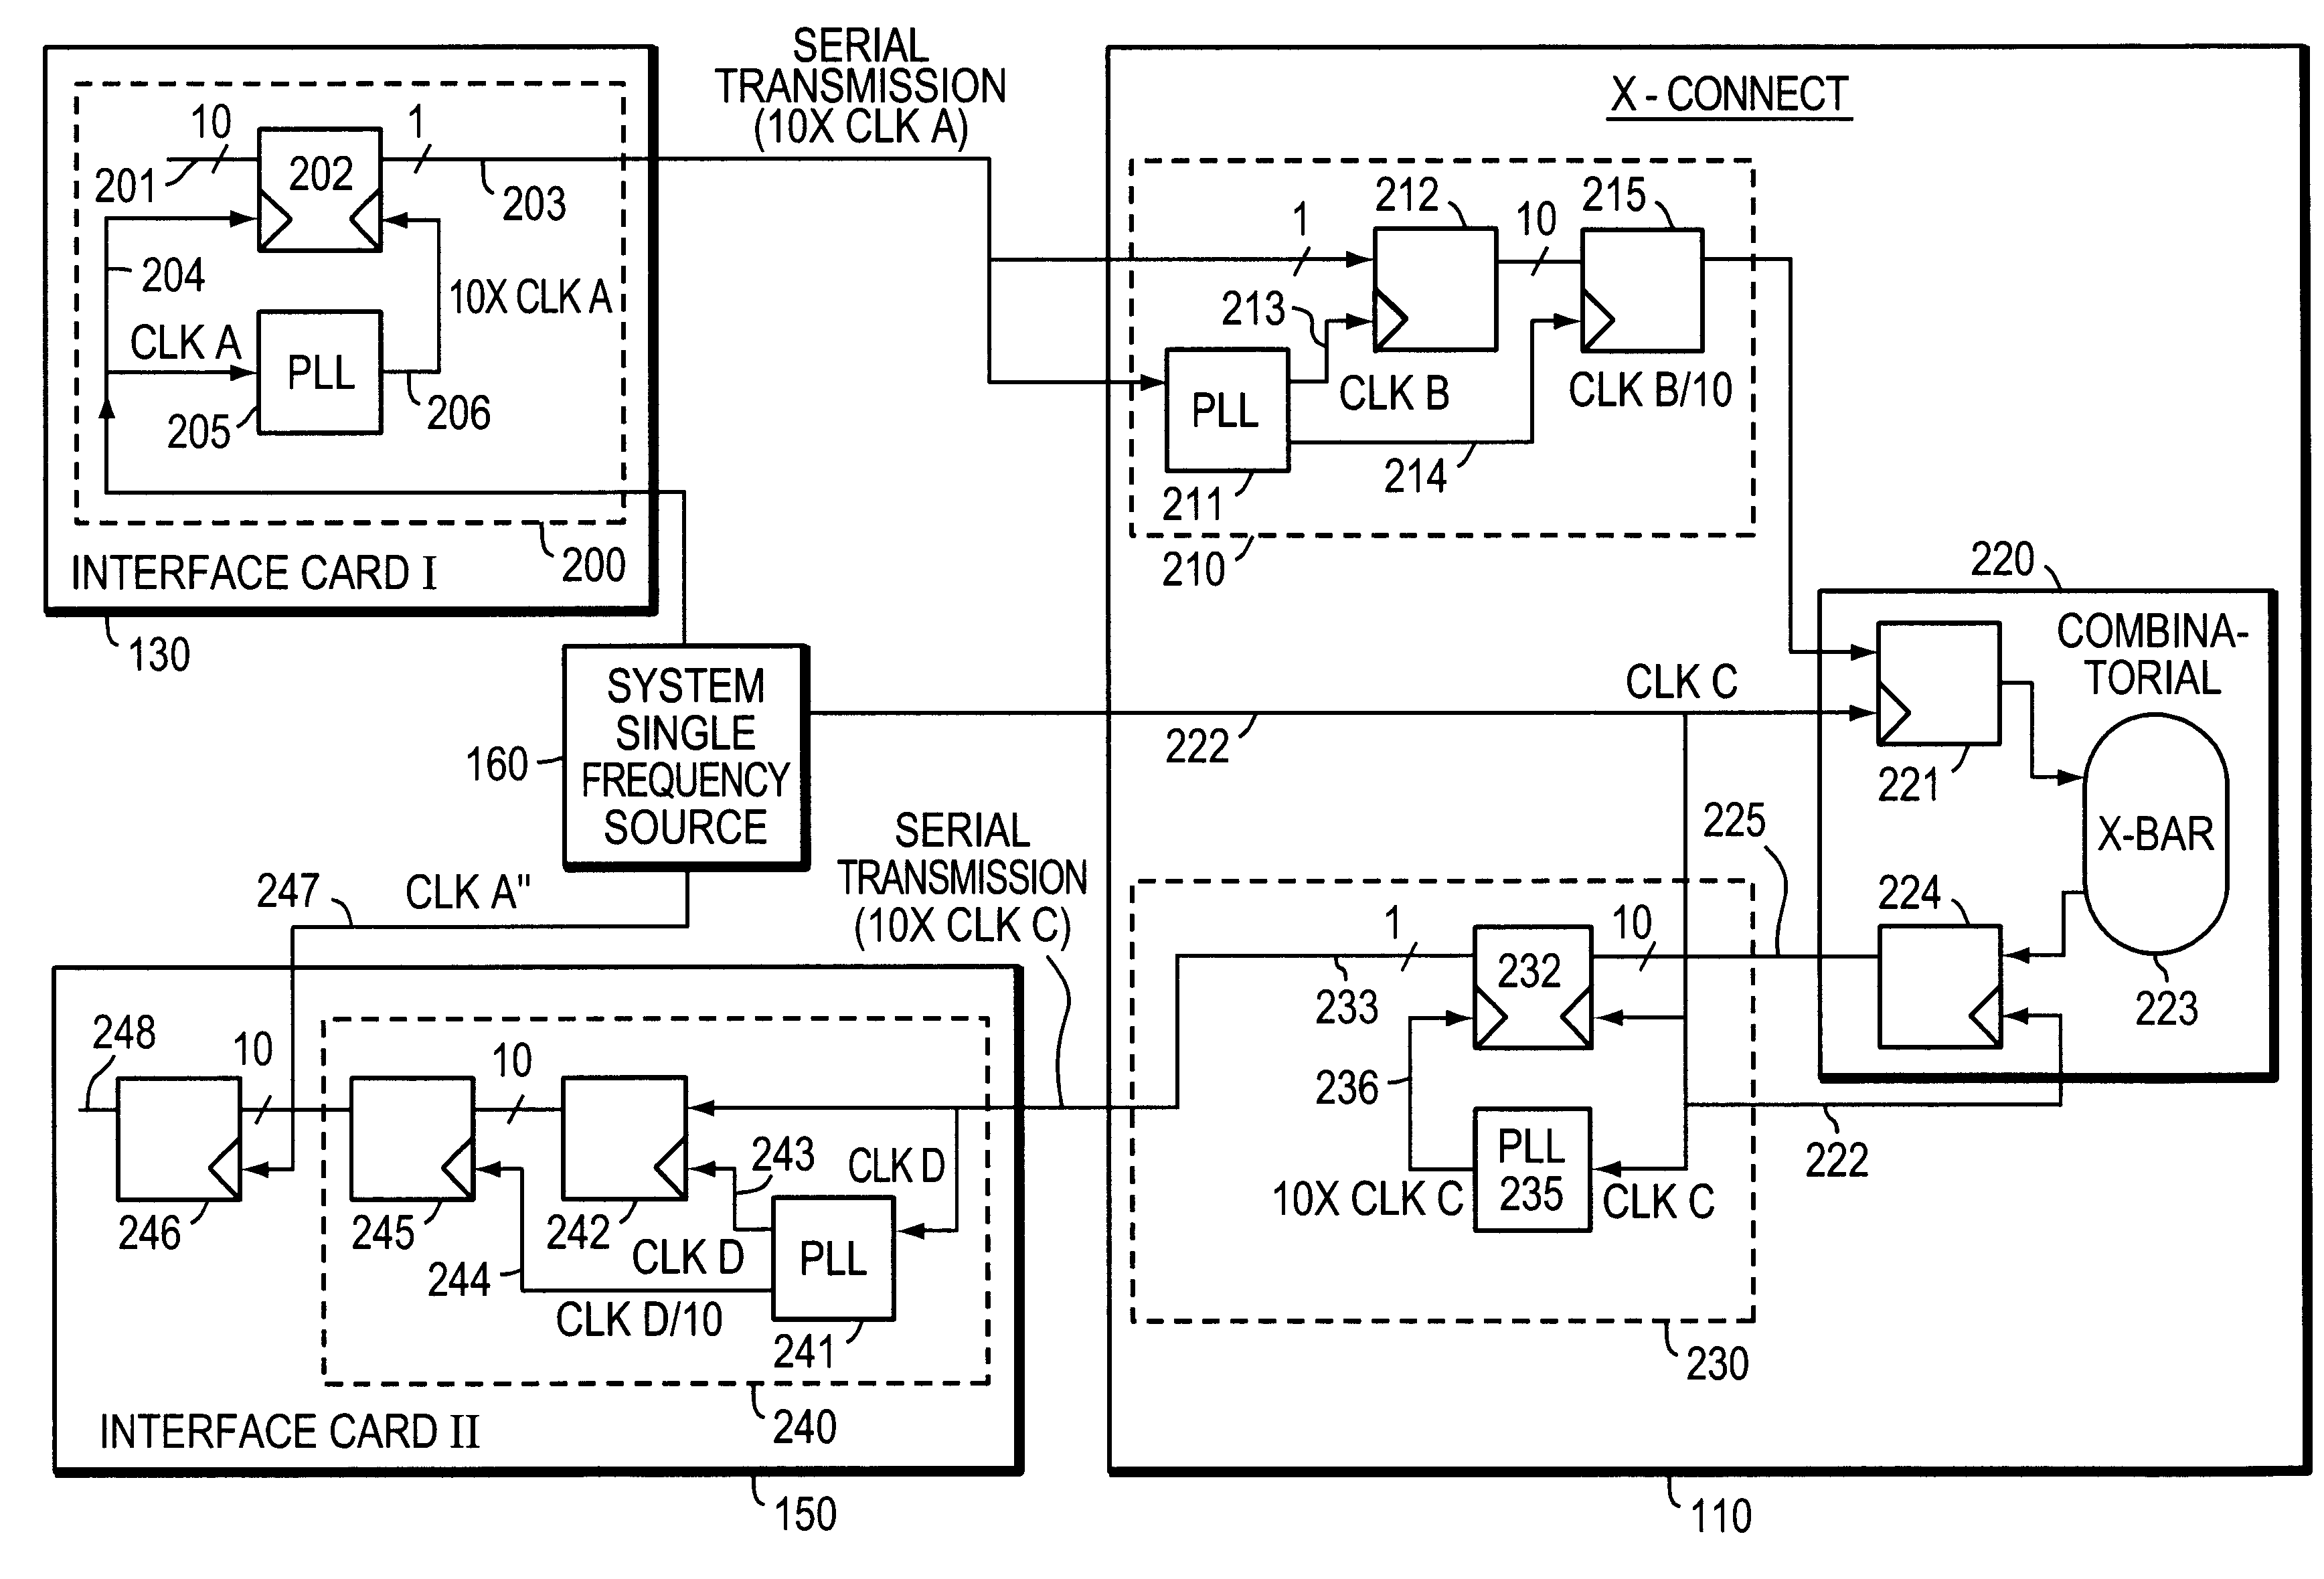 Synchronous pipelined switch using serial transmission